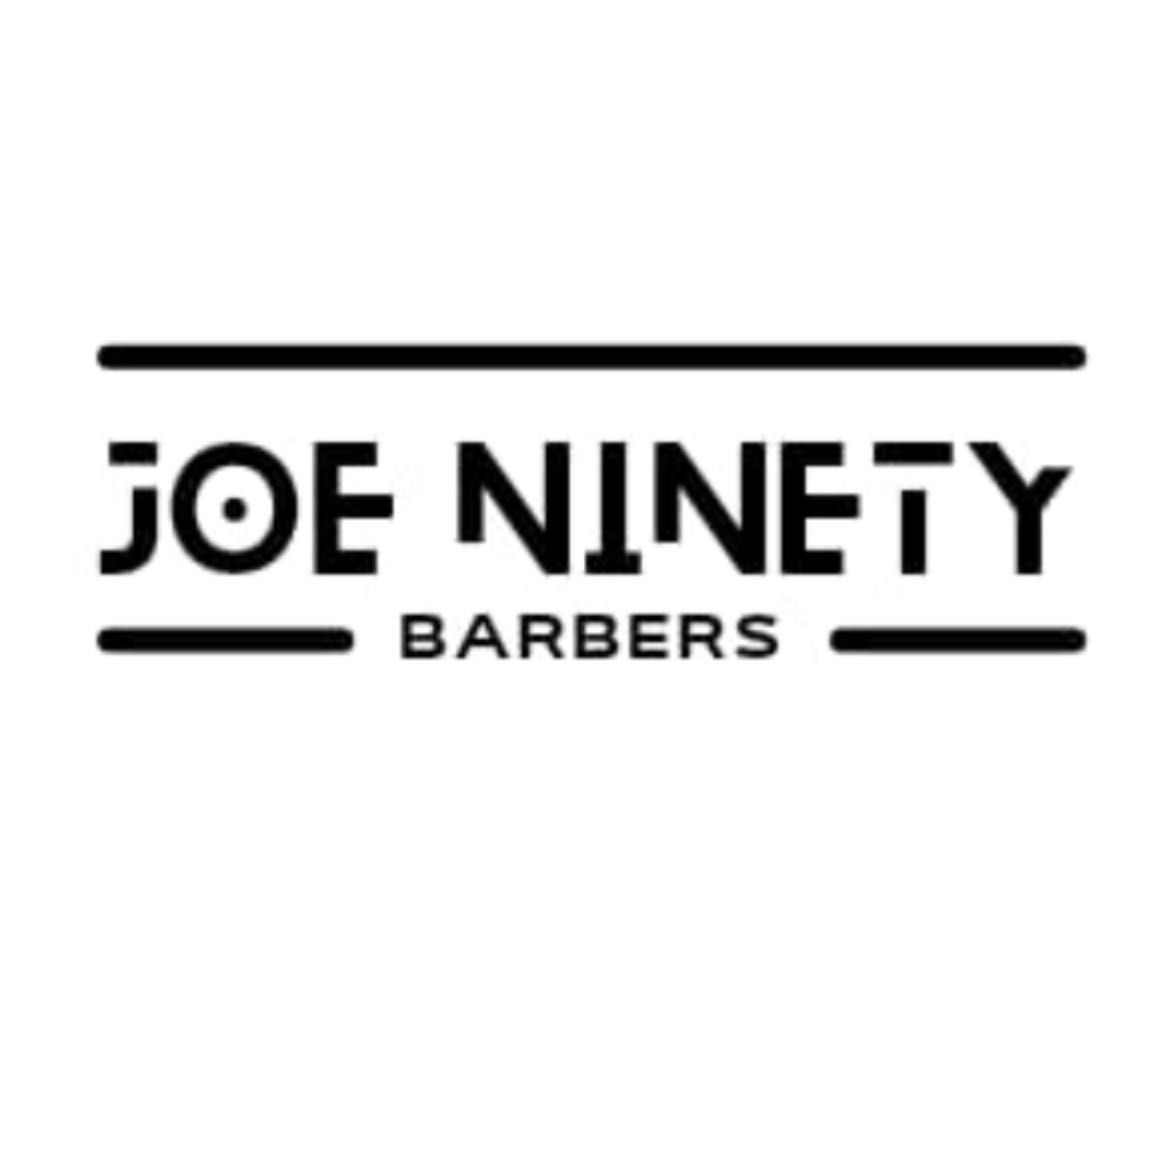 Joe Ninety Barbers, 3 Town End, Bolsover, S44 6DT, Chesterfield